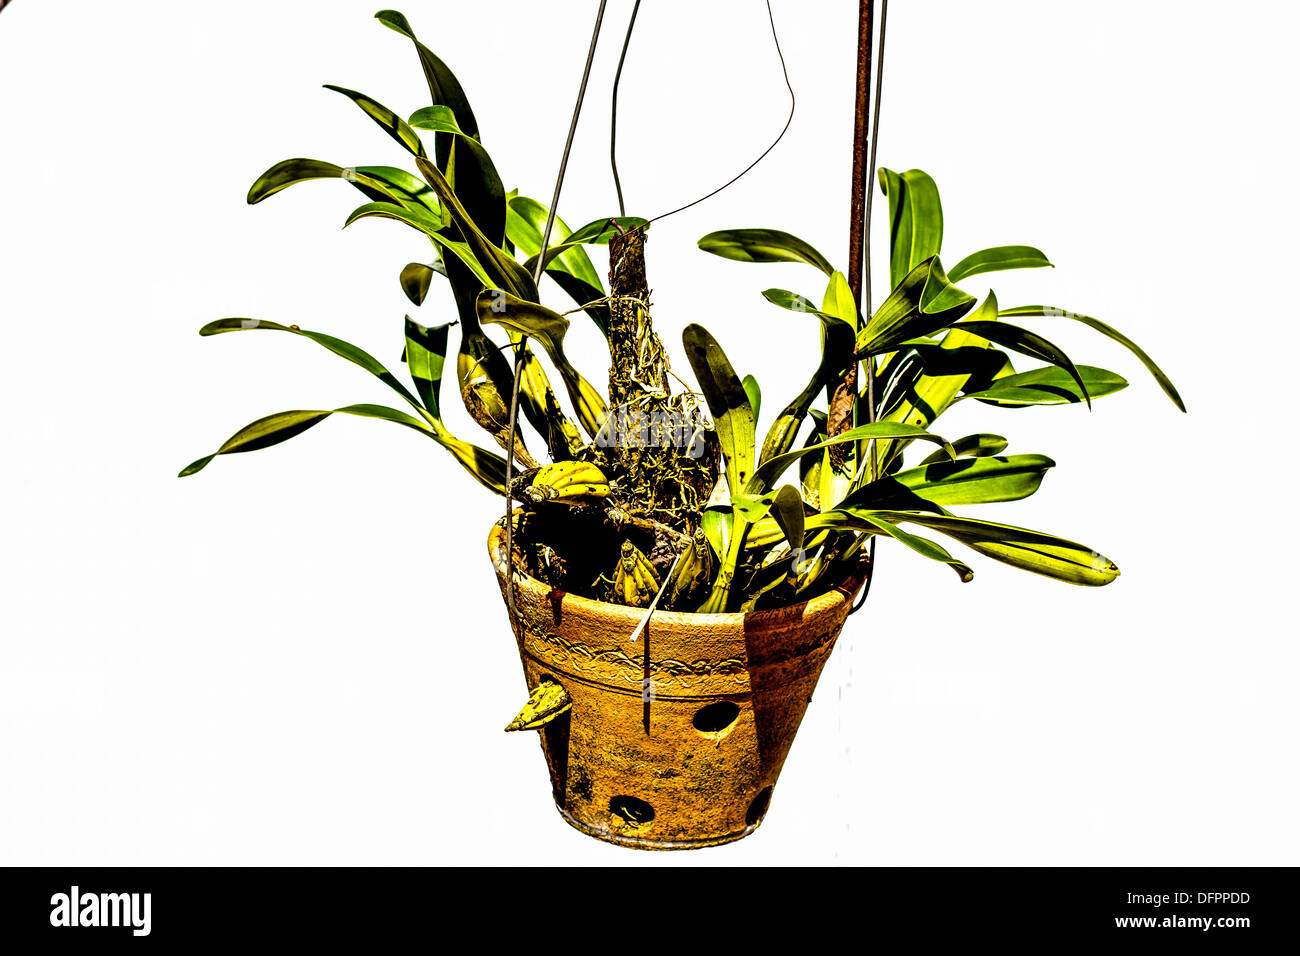 The Green orchids hanging on branches. Stock Photo